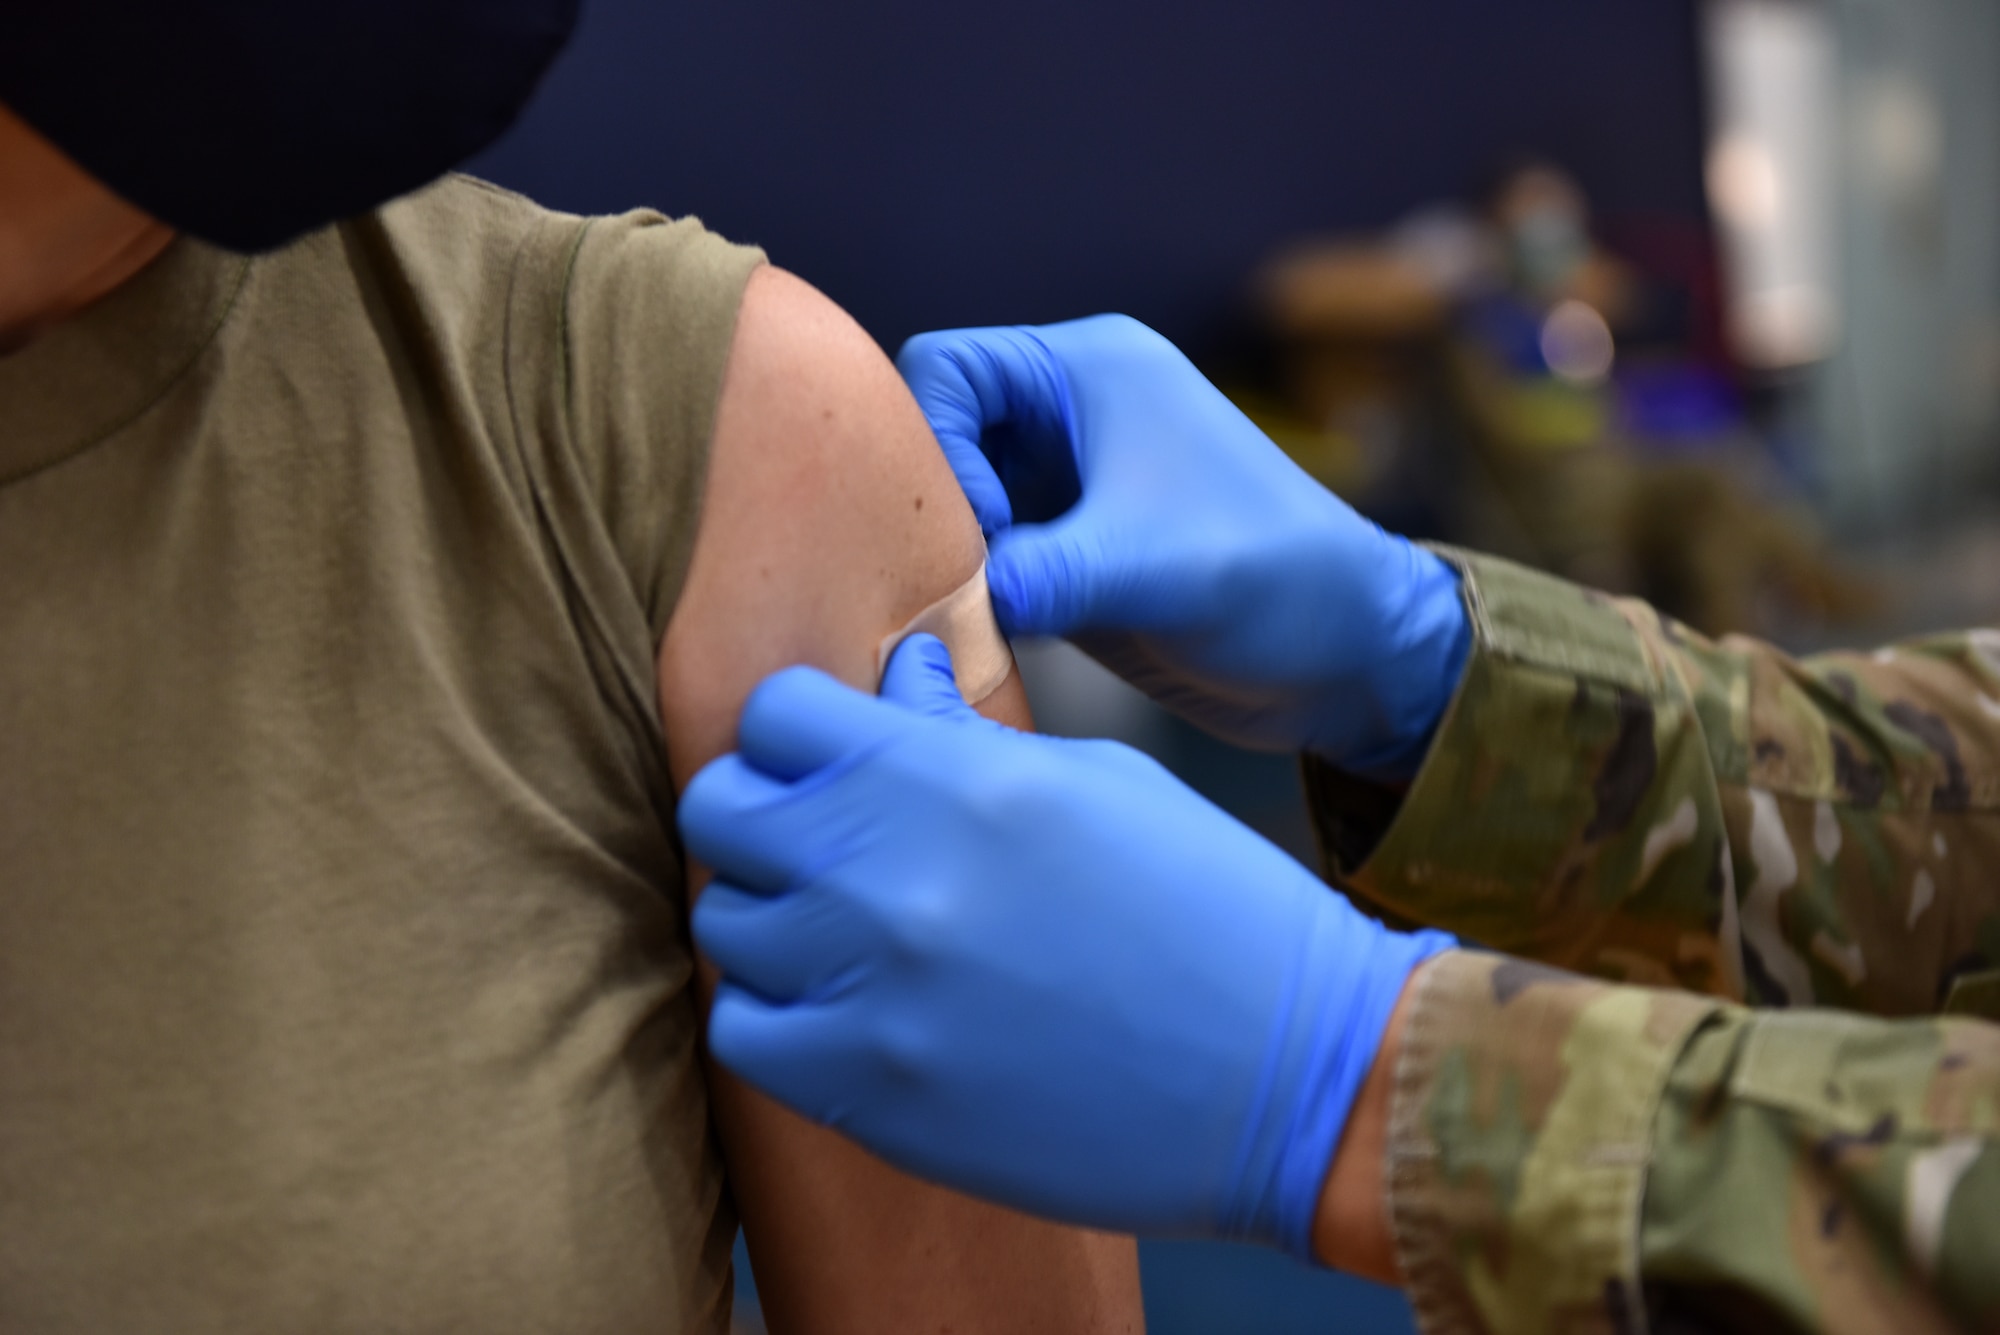 U.S. Air Force Airman First Class Benjamin Loera, 17th Operational Medical Readiness Squadron medical technician for active duty, applies a band aide to Chief Master Sgt. Casy Boomershine’s, 17th Training Wing command chief, arm after administering the COVID-19 vaccine at Mathis Fitness Center on Goodfellow Air Force Base, Texas, Jan. 22, 2021. On Jan. 20, Team Goodfellow vaccinated its frontline and mission essential positions and those who are considered high risk first, in accordance with the Department of the Air Forces distribution plan. (U.S. Air Force photo by Staff Sgt. Seraiah Wolf)